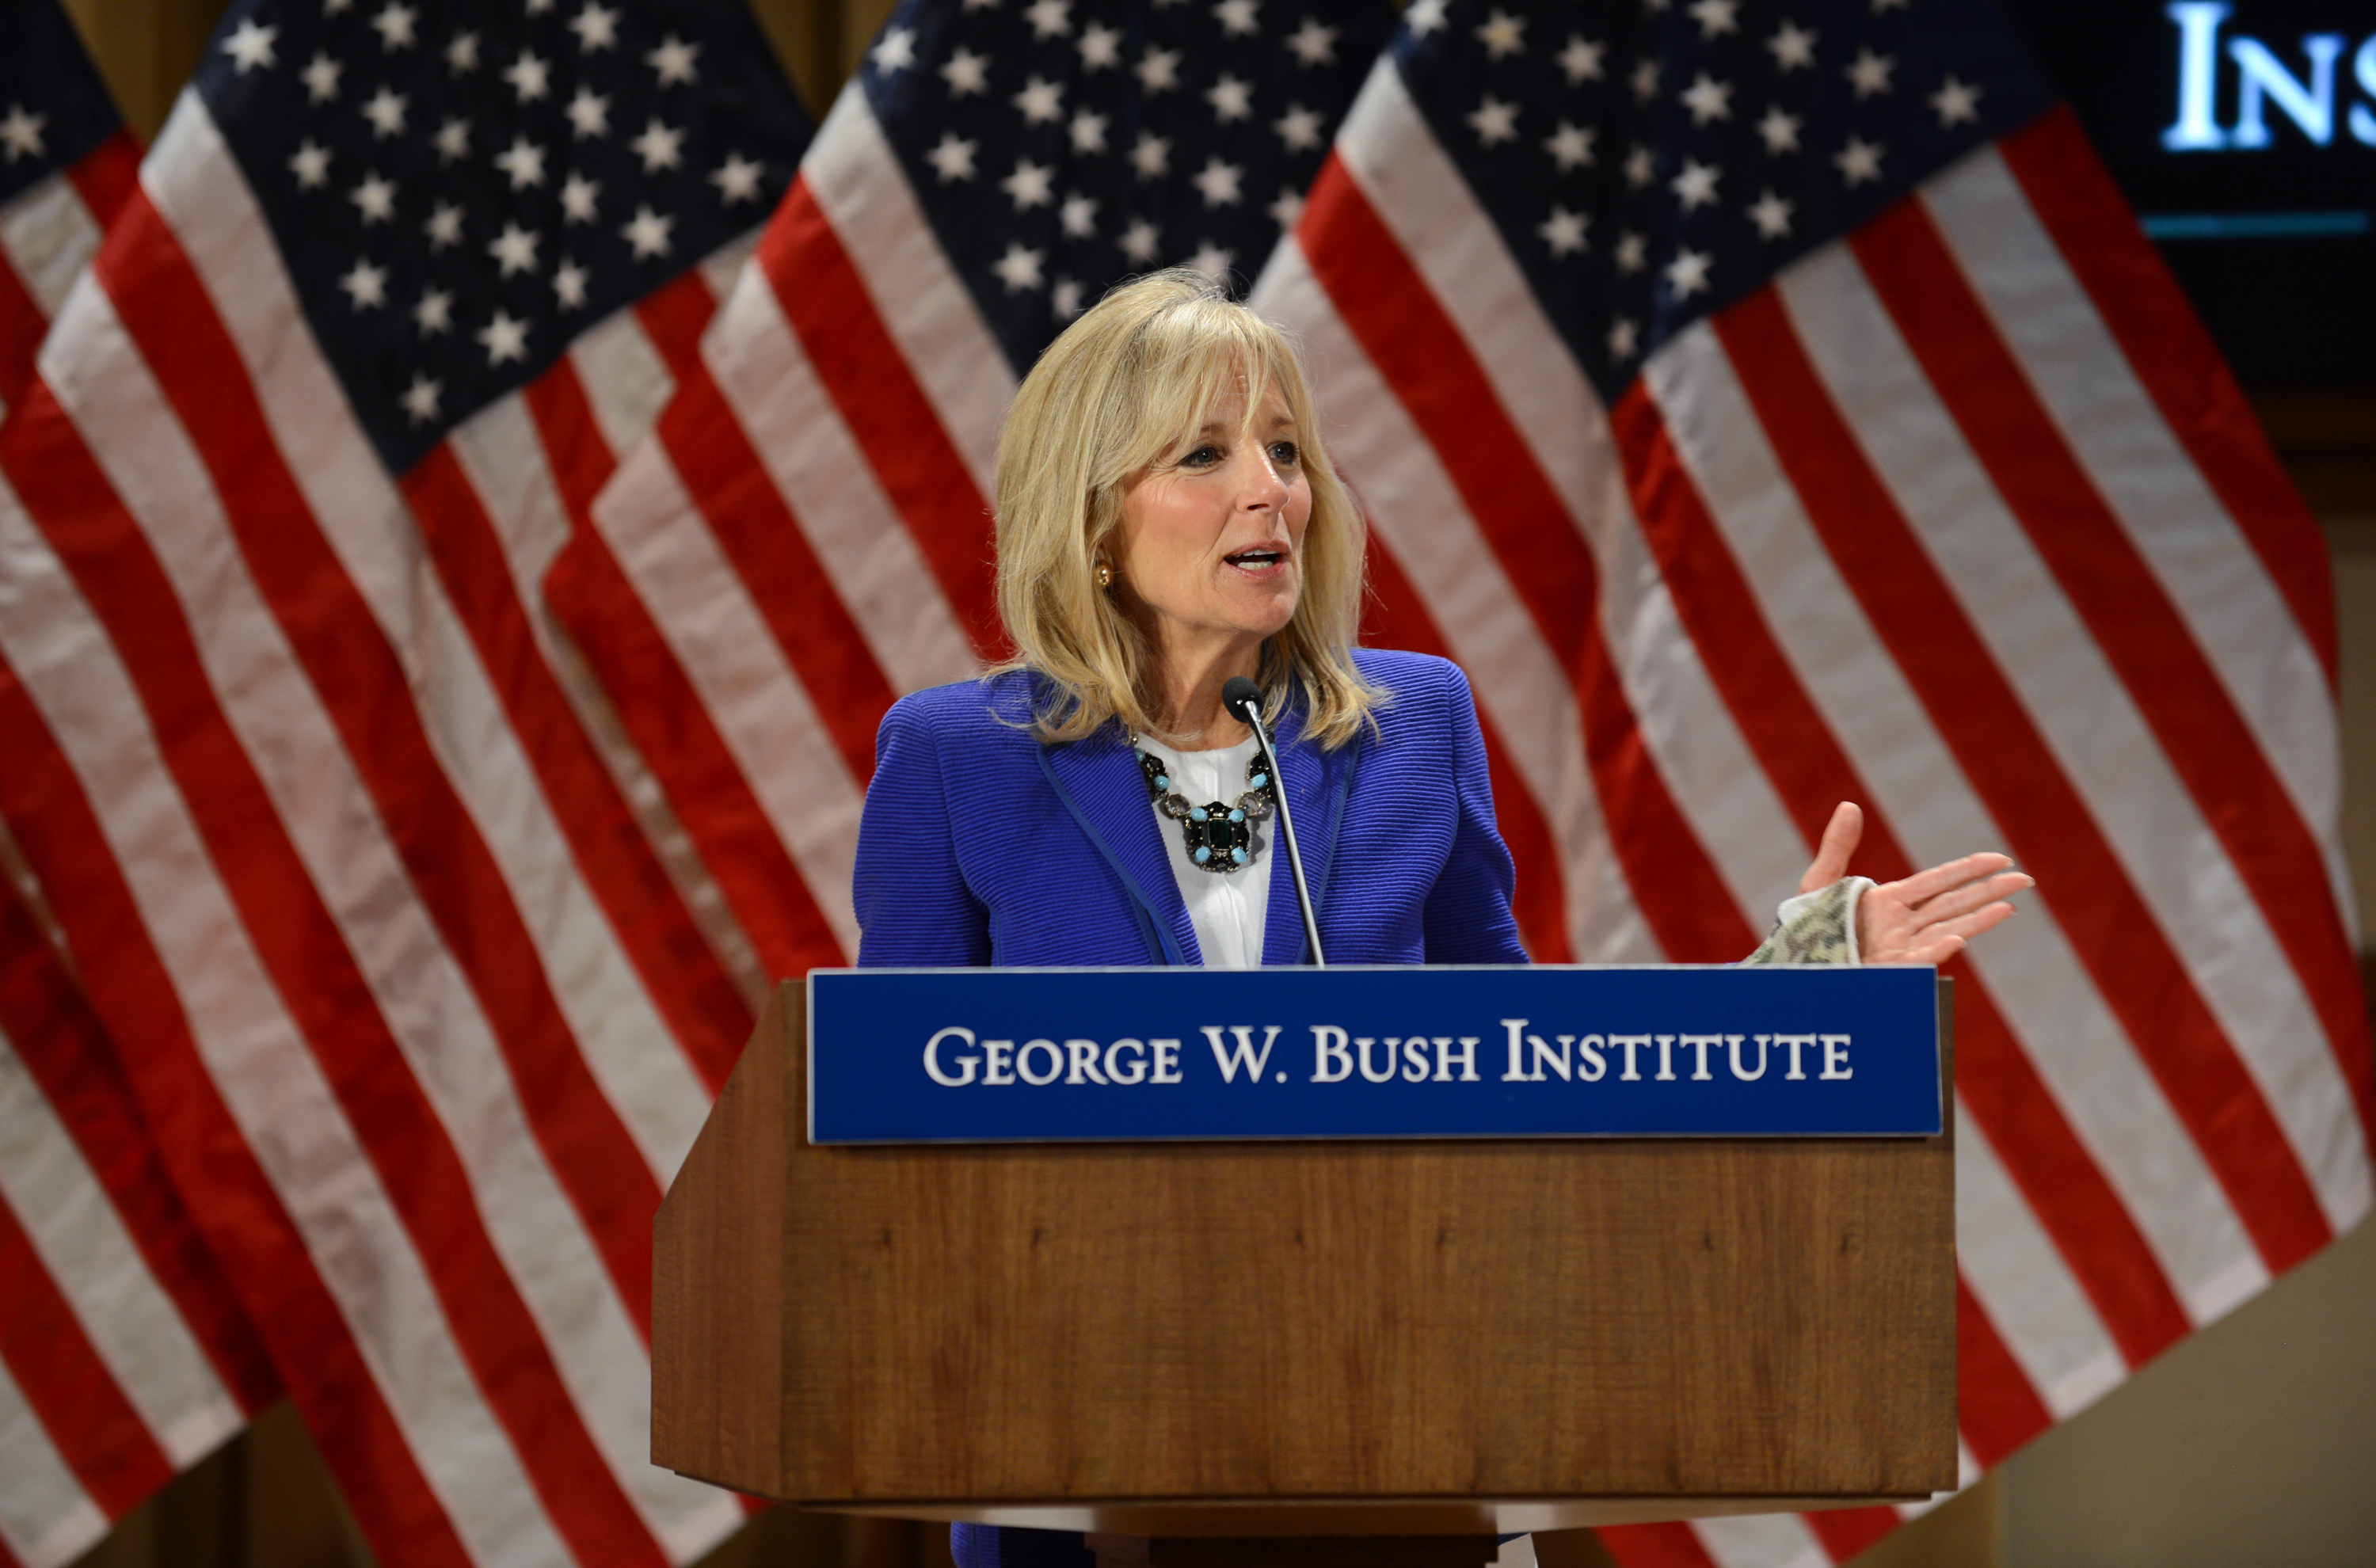 Dr. Biden delivers remarks at the George W. Bush Presidential Center